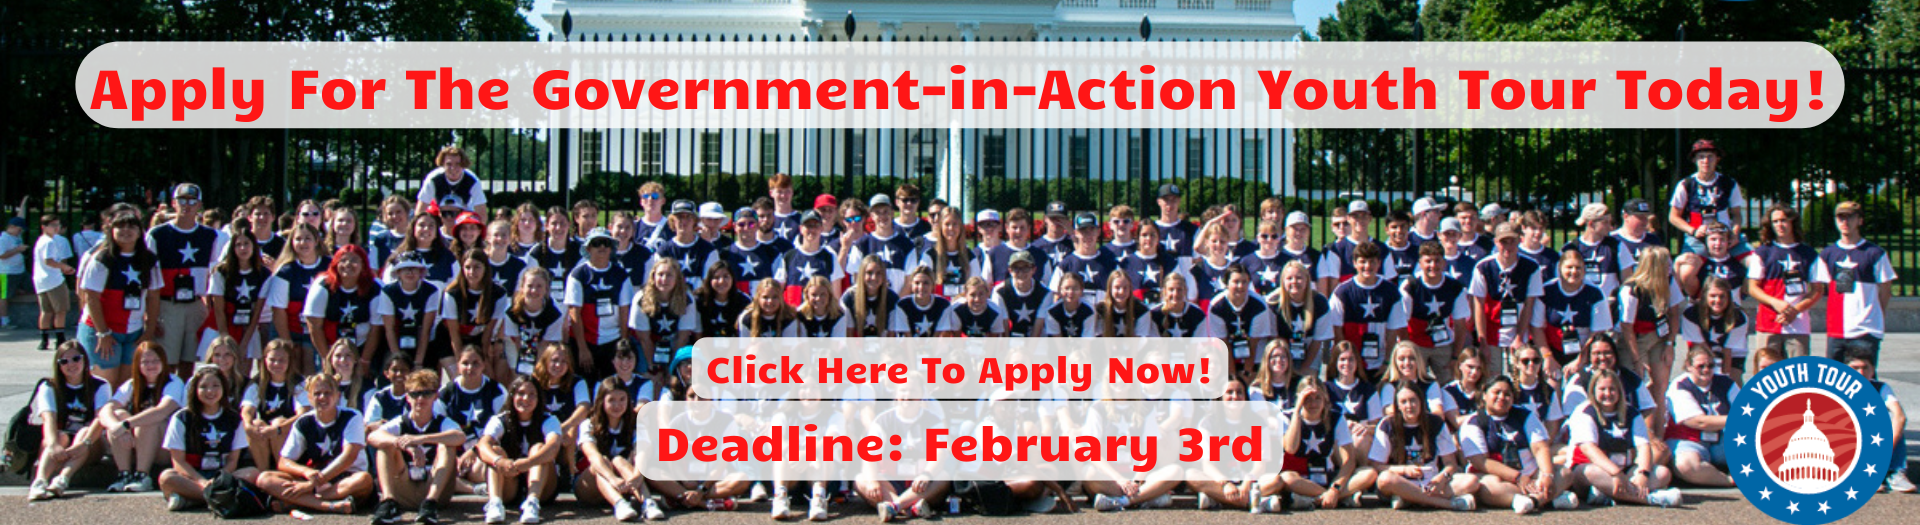 Government-in-Action Youth Tour